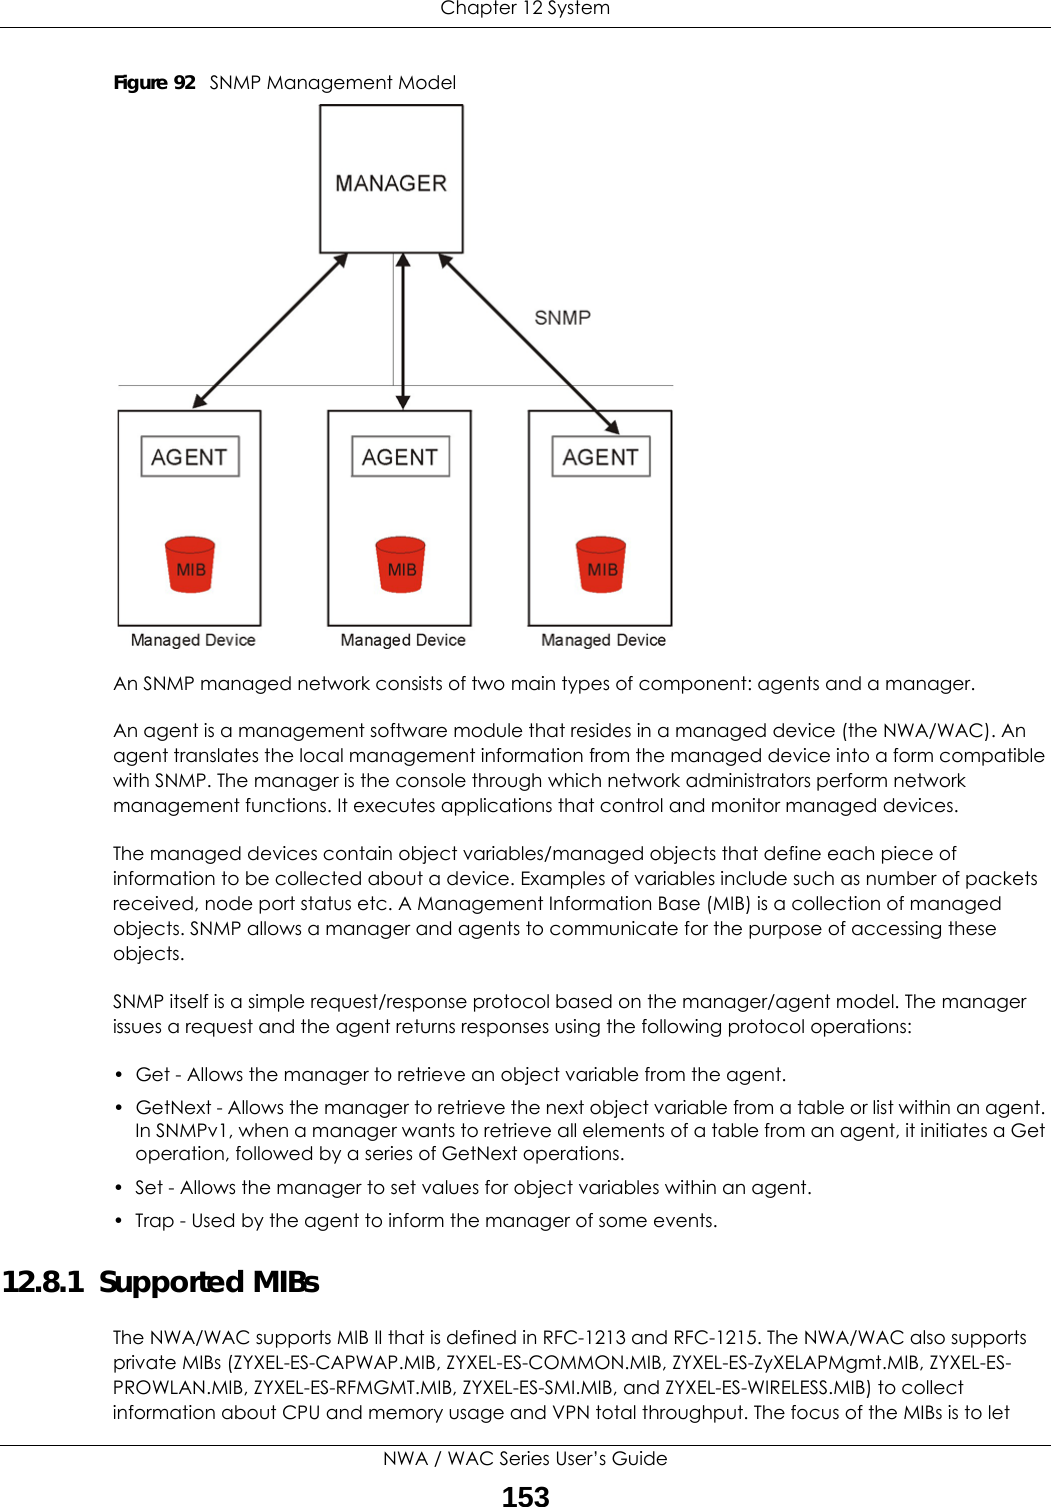 Chapter 12 SystemNWA / WAC Series User’s Guide153Figure 92   SNMP Management ModelAn SNMP managed network consists of two main types of component: agents and a manager. An agent is a management software module that resides in a managed device (the NWA/WAC). An agent translates the local management information from the managed device into a form compatible with SNMP. The manager is the console through which network administrators perform network management functions. It executes applications that control and monitor managed devices. The managed devices contain object variables/managed objects that define each piece of information to be collected about a device. Examples of variables include such as number of packets received, node port status etc. A Management Information Base (MIB) is a collection of managed objects. SNMP allows a manager and agents to communicate for the purpose of accessing these objects.SNMP itself is a simple request/response protocol based on the manager/agent model. The manager issues a request and the agent returns responses using the following protocol operations:• Get - Allows the manager to retrieve an object variable from the agent. • GetNext - Allows the manager to retrieve the next object variable from a table or list within an agent. In SNMPv1, when a manager wants to retrieve all elements of a table from an agent, it initiates a Get operation, followed by a series of GetNext operations. • Set - Allows the manager to set values for object variables within an agent. • Trap - Used by the agent to inform the manager of some events.12.8.1  Supported MIBsThe NWA/WAC supports MIB II that is defined in RFC-1213 and RFC-1215. The NWA/WAC also supports private MIBs (ZYXEL-ES-CAPWAP.MIB, ZYXEL-ES-COMMON.MIB, ZYXEL-ES-ZyXELAPMgmt.MIB, ZYXEL-ES-PROWLAN.MIB, ZYXEL-ES-RFMGMT.MIB, ZYXEL-ES-SMI.MIB, and ZYXEL-ES-WIRELESS.MIB) to collect information about CPU and memory usage and VPN total throughput. The focus of the MIBs is to let 